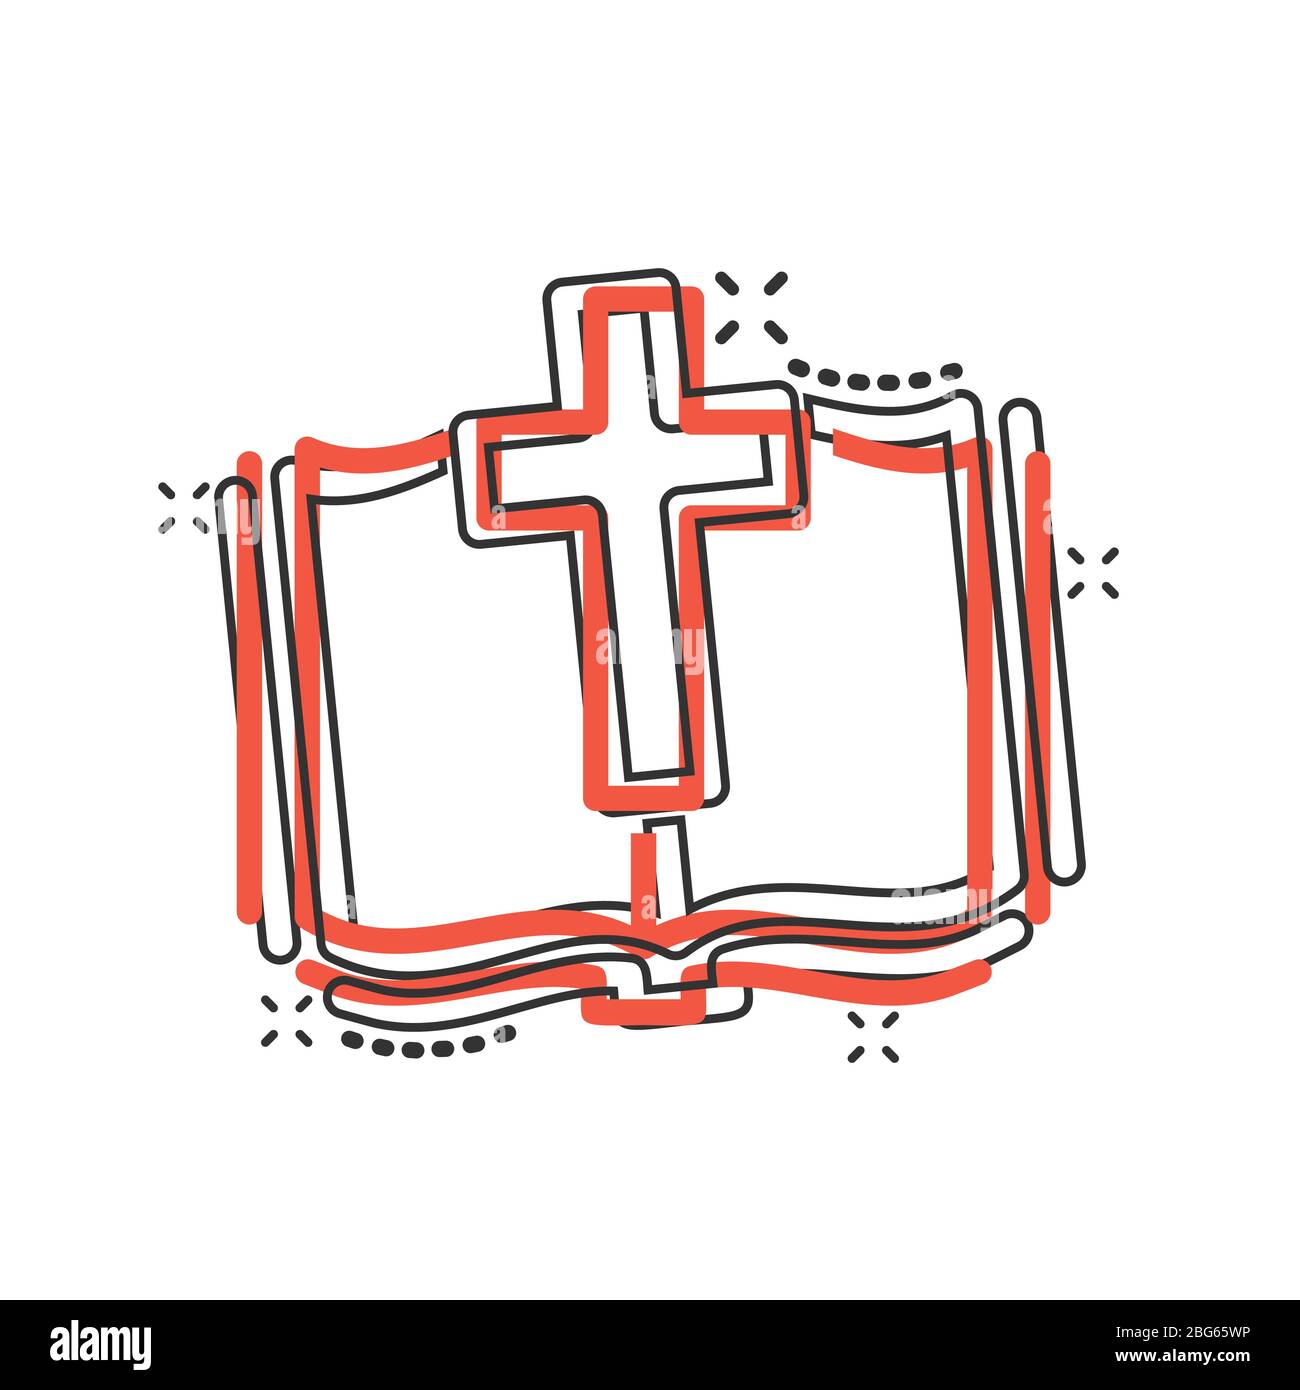 Bible book icon in comic style. Church faith cartoon vector illustration on white isolated background. Spirituality splash effect business concept. Stock Vector